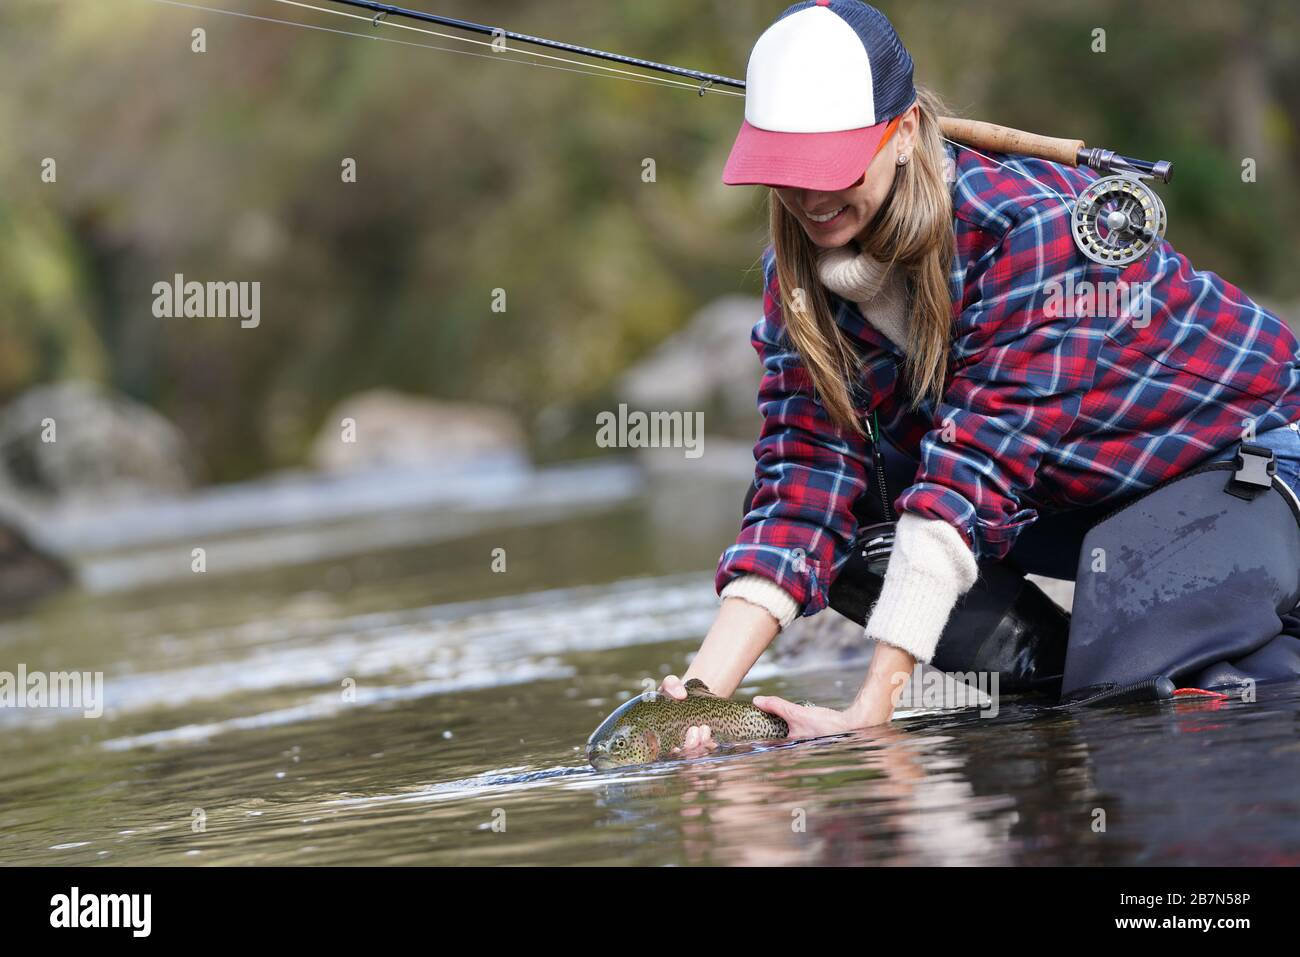 Woman fly fishing river in waders and fishing vest USA Stock Photo